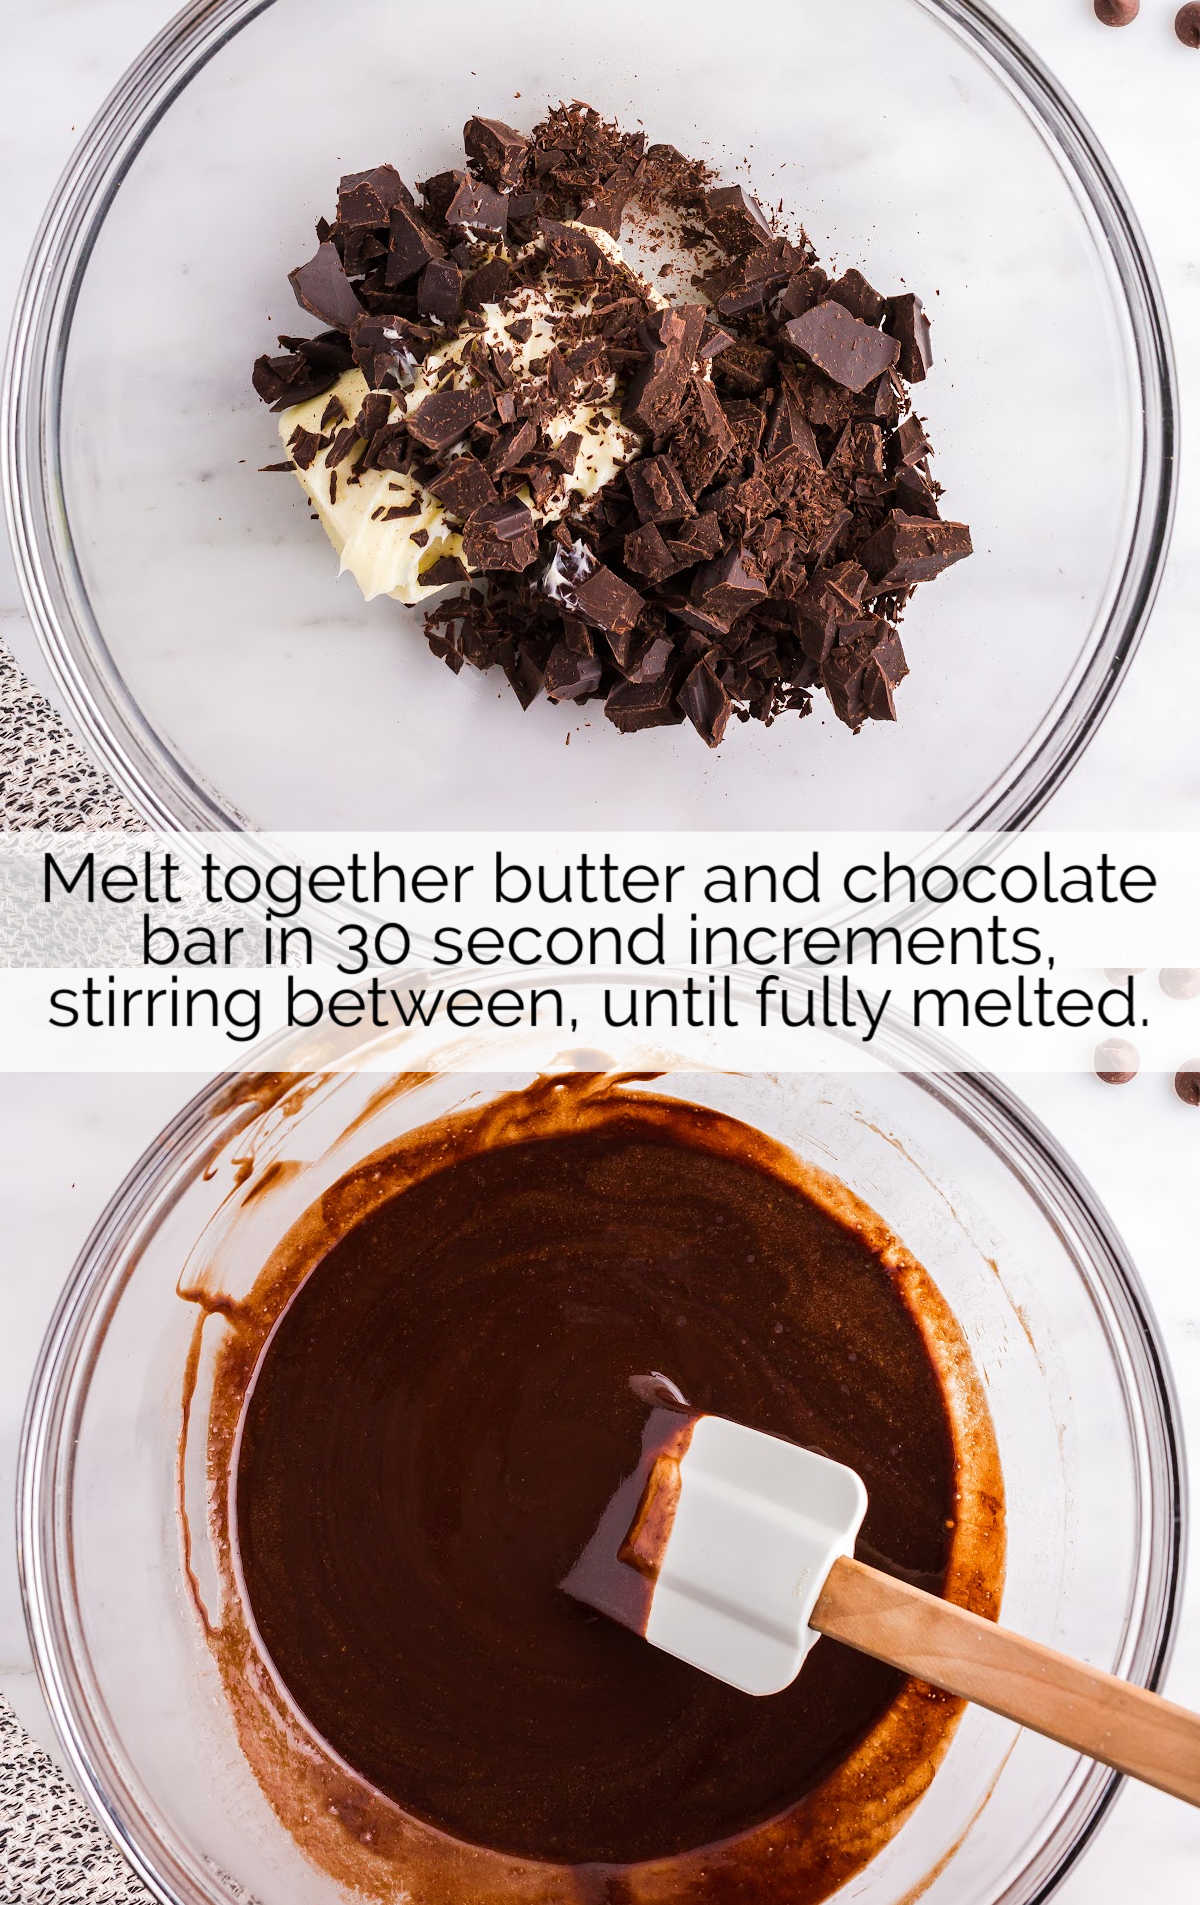 butter and chocolate melted together in a bowl